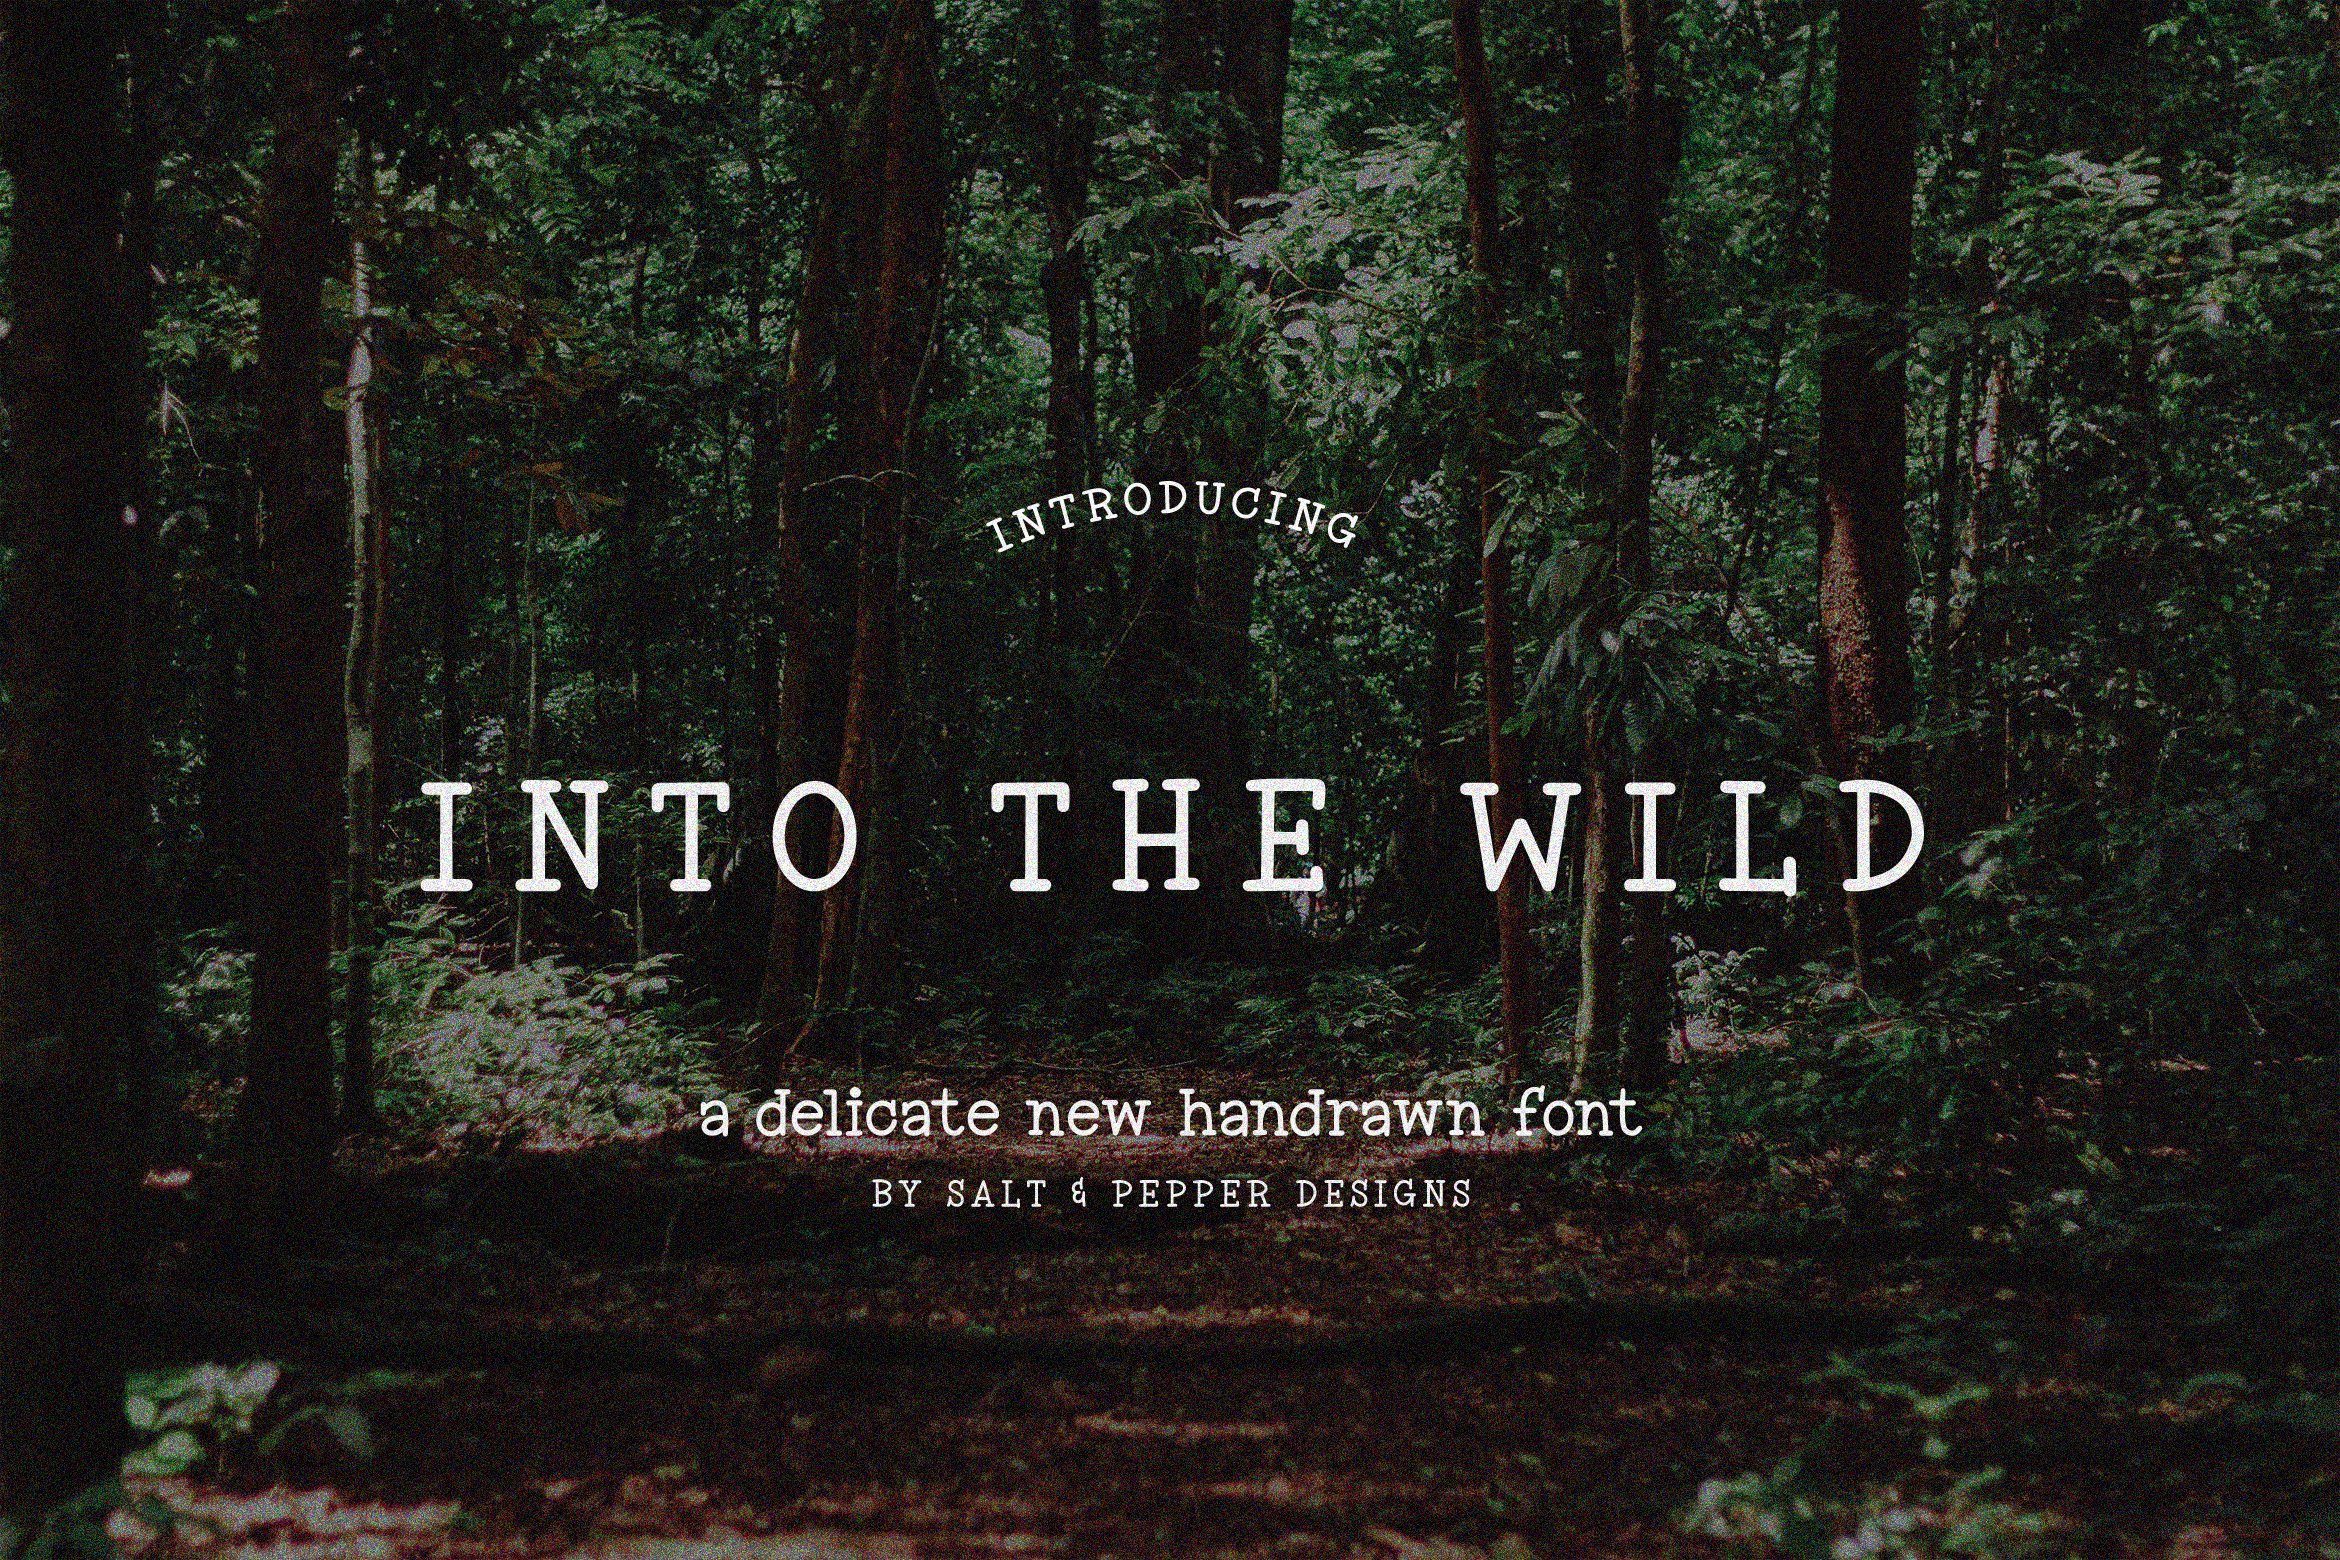 Into the Wild Font cover image.